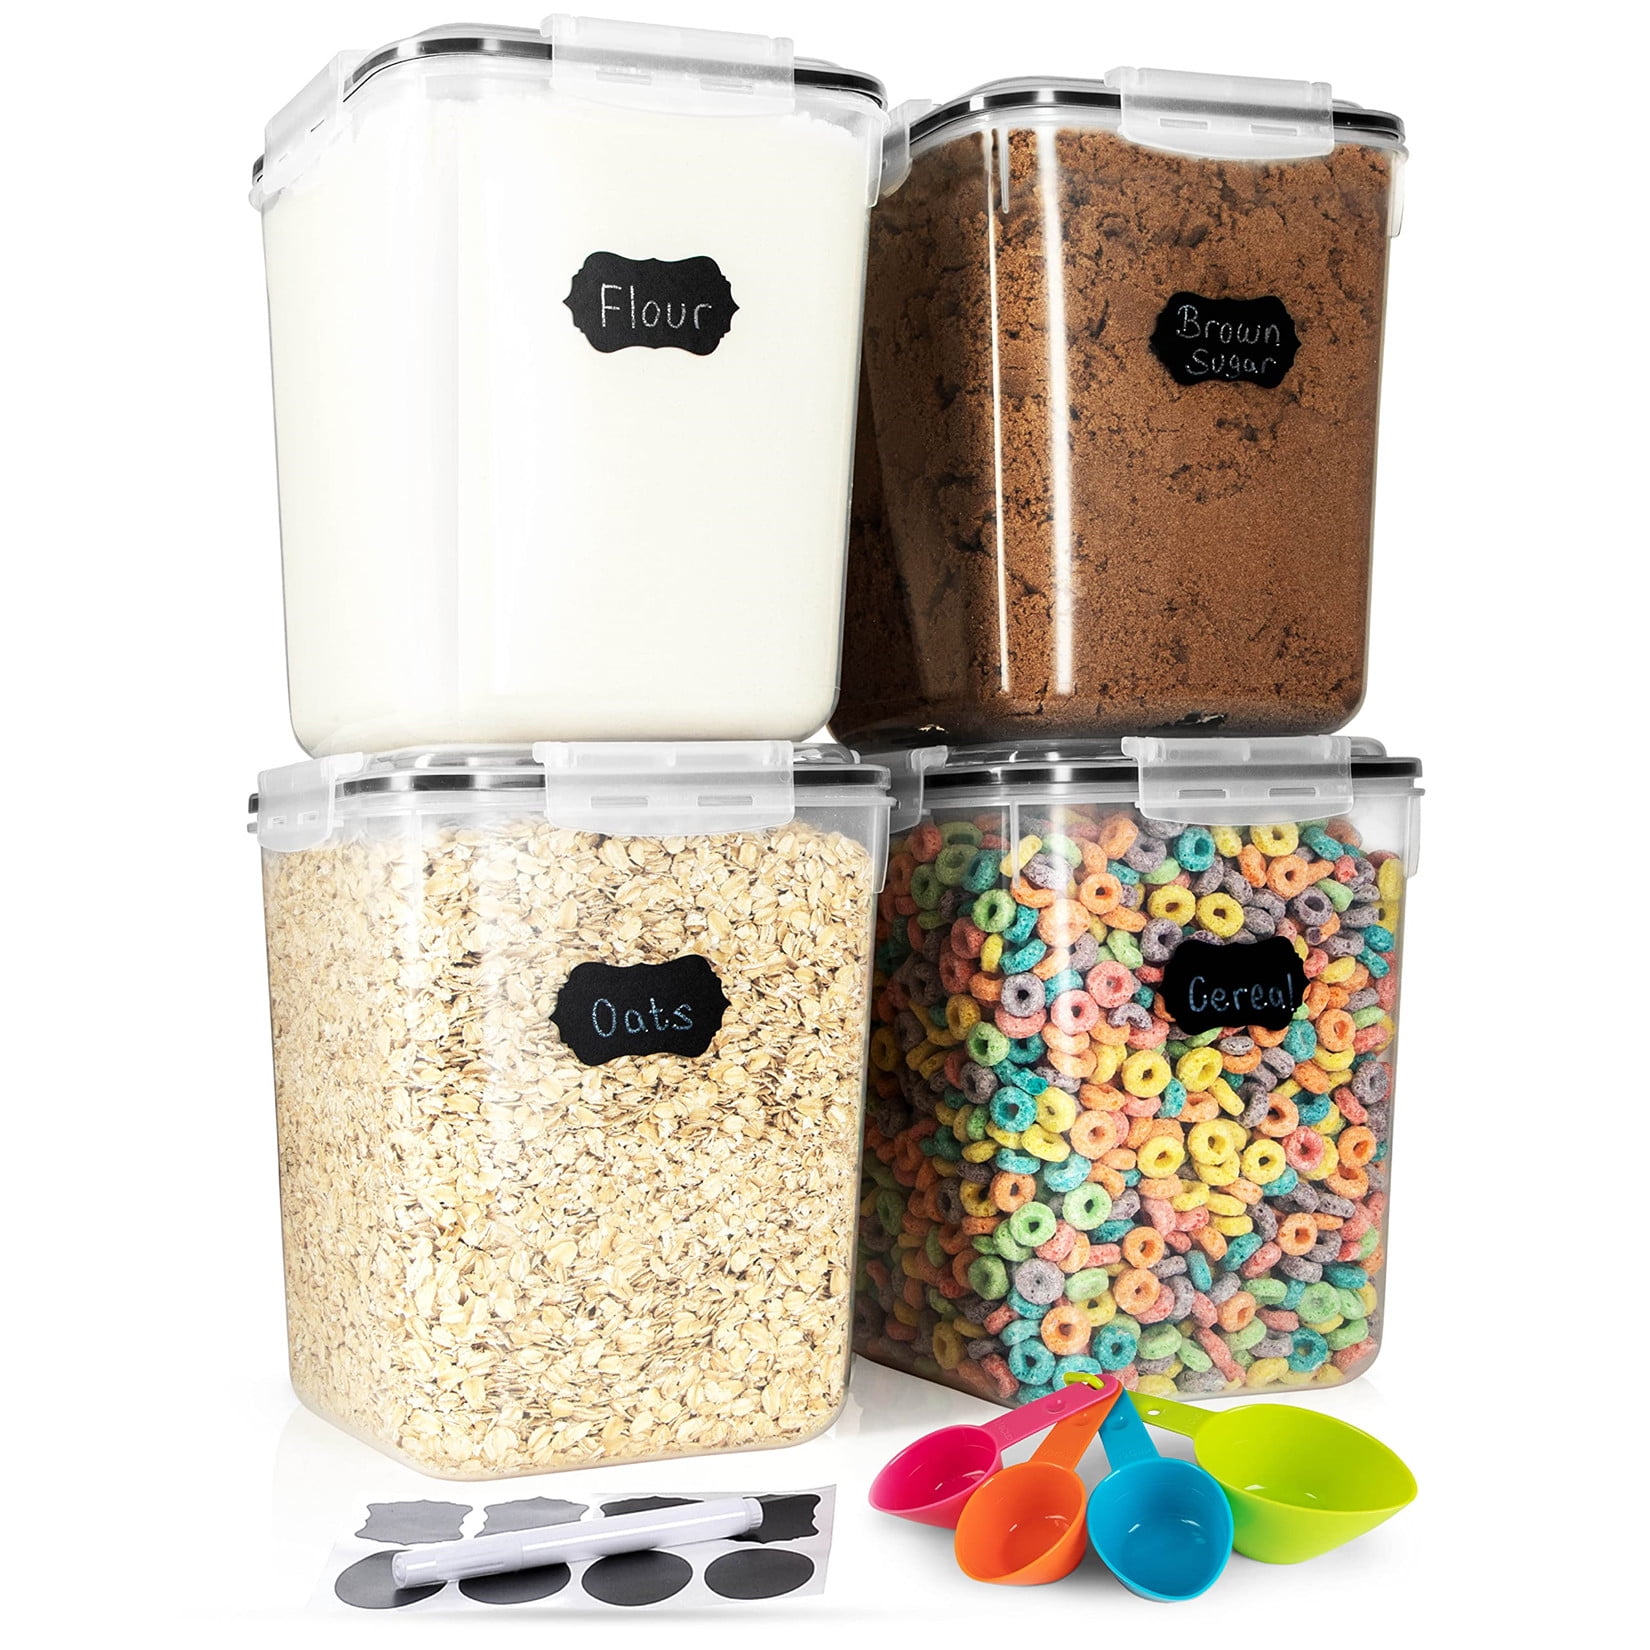 Home Intuition 4-Piece Ceramic Kitchen Canisters Set, Airtight Containers with Wooden Spoons Reusable Chalk Labels and Marker for Sugar, Coffee, Flour